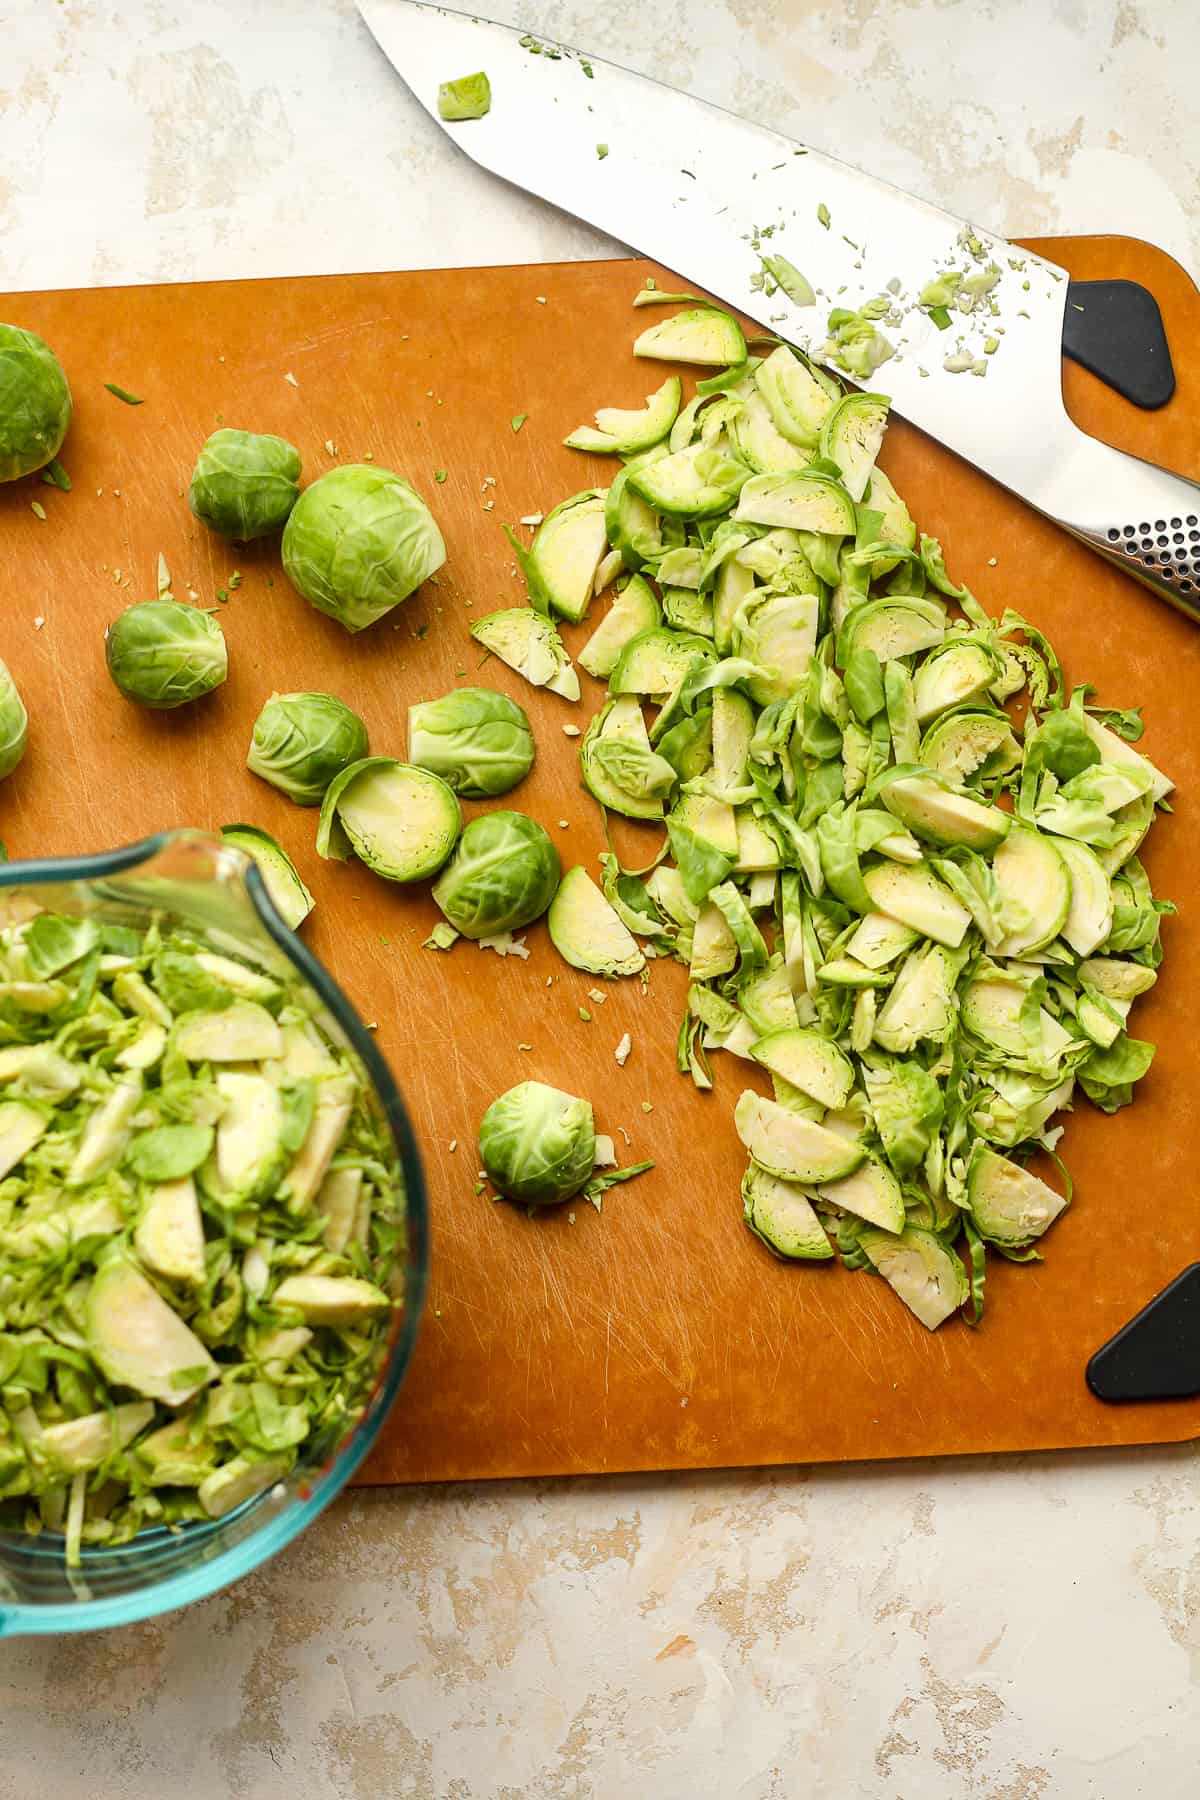 A cutting board with a knife after thinly slicing Brussels sprouts.